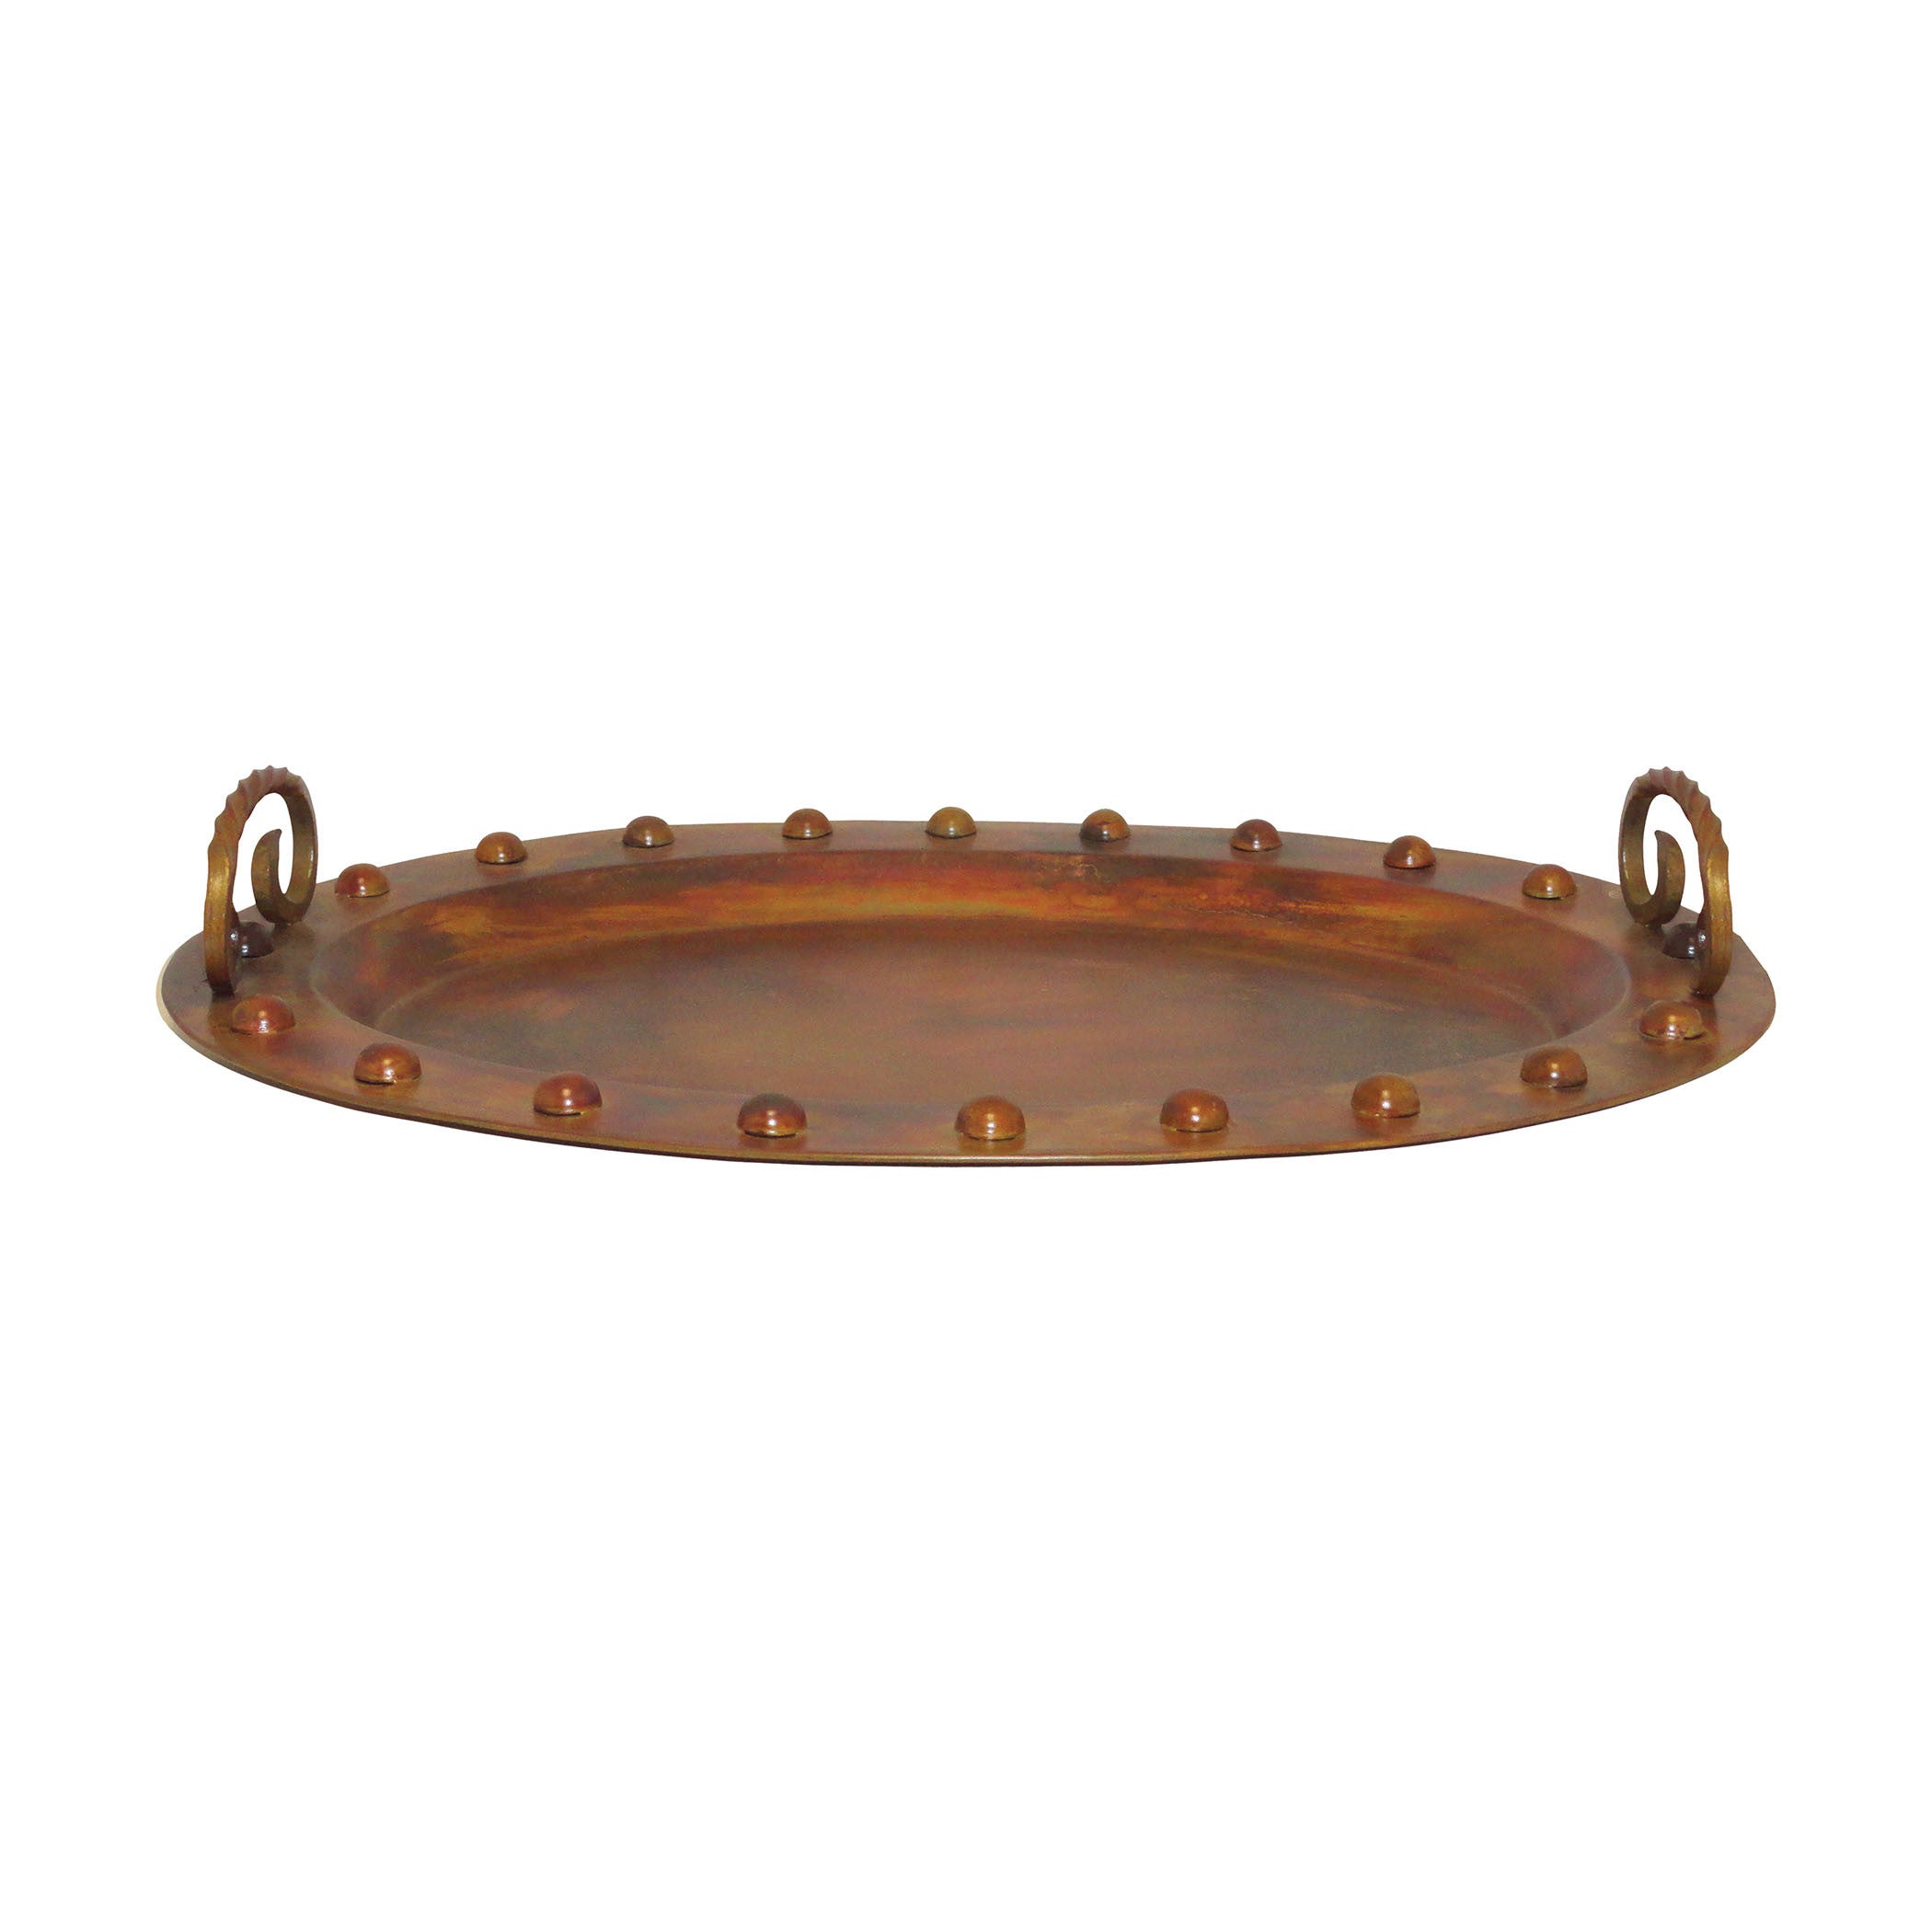 Pomeroy Pom-644603 Misson Collection Burned Copper Finish Tray